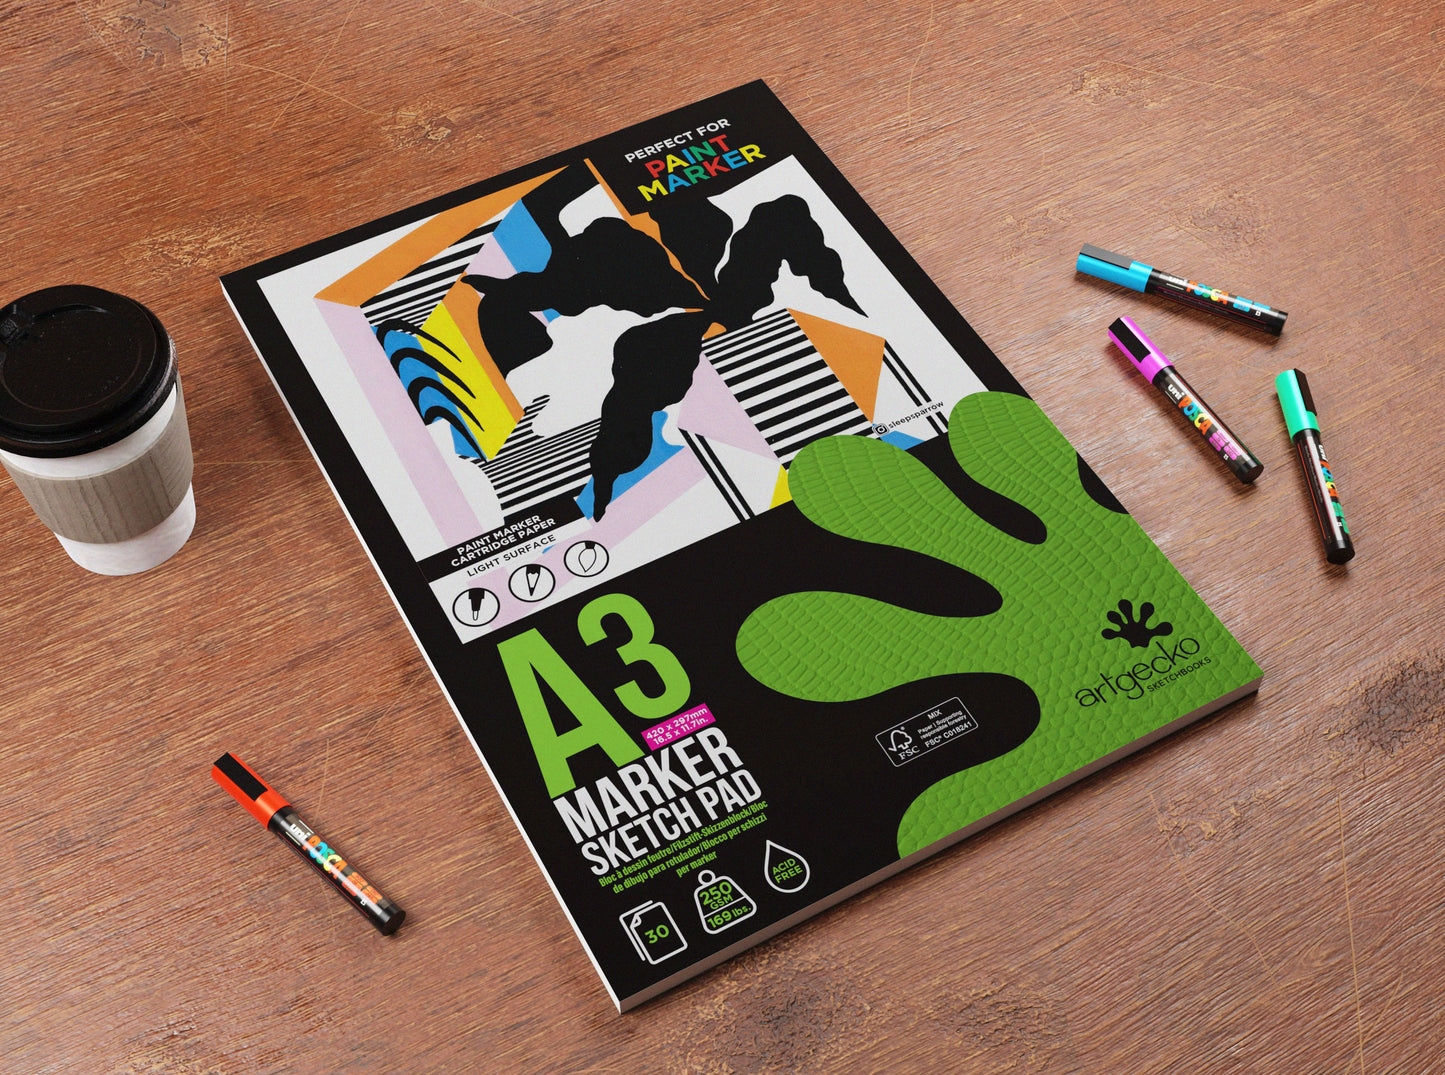 Sketch Book: Sketchbook for Markers with Dolphin Drawing on Cover for Drawing, Painting Doodling, Writing, Sketching with 120 Pages